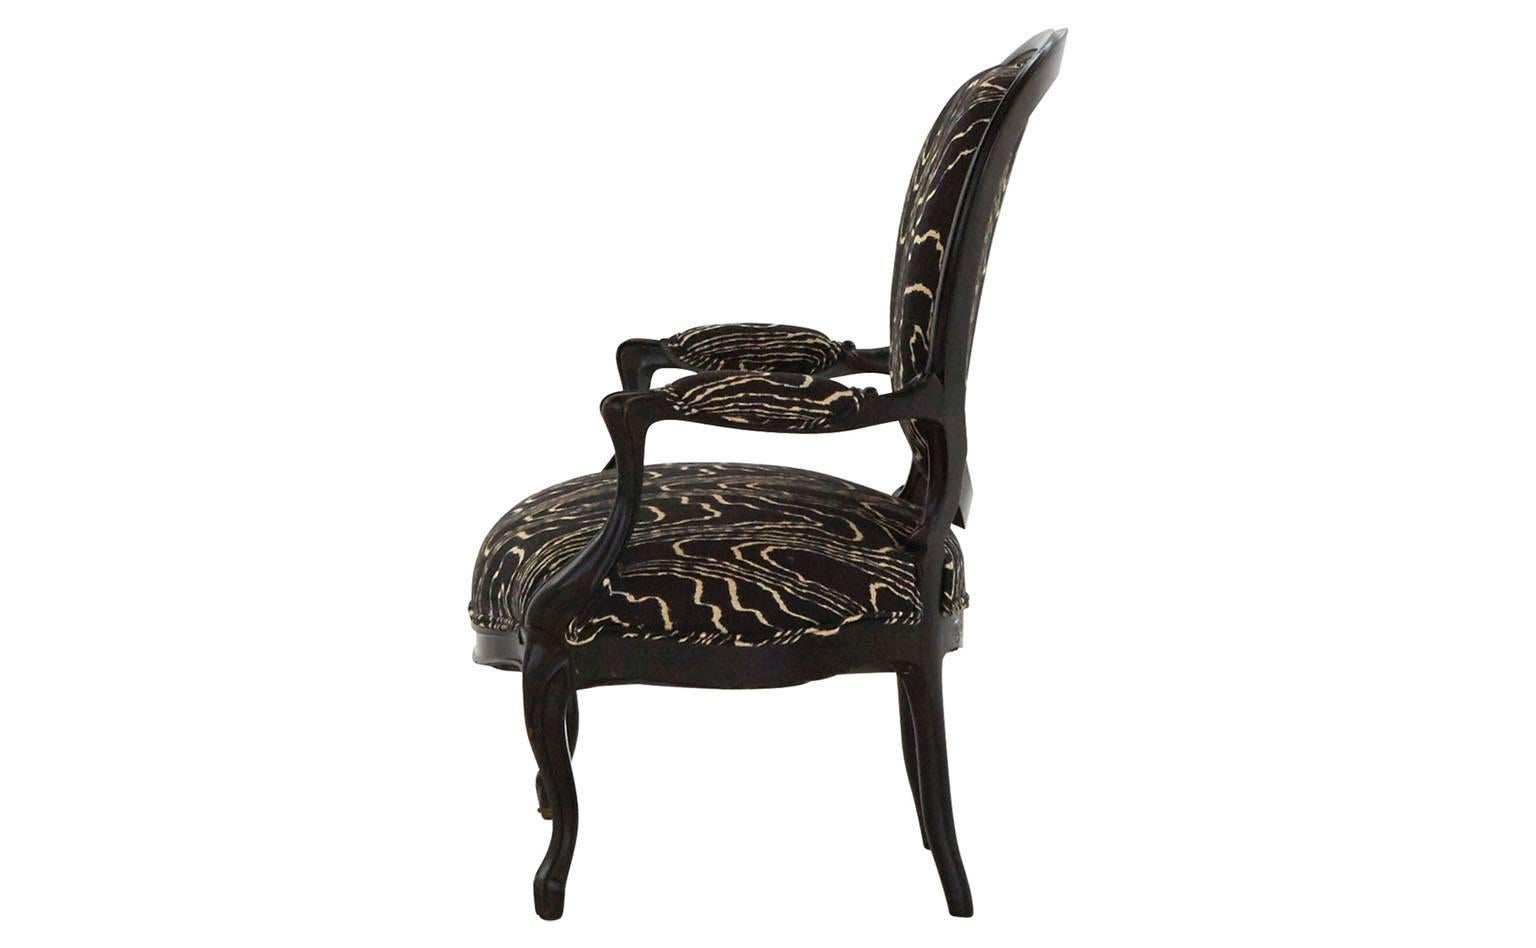 Reupholstered in Kelly Wearstler agate ebony linen.
Hand-painted ebony wood,
20th century,
France.
Set of two available (priced individually).

Dimensions:
Ooverall: 23" W x 21" D x 38" H. 
Seat height: 15.5" H.
Arm